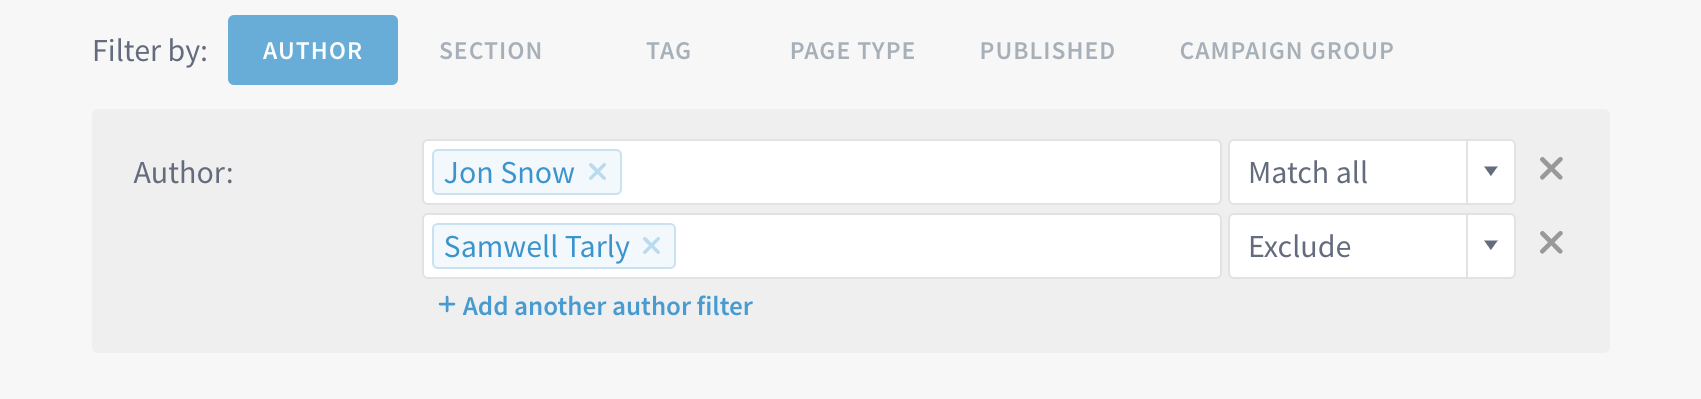 An example of using multiple filters in the Parse.ly Dashboard.